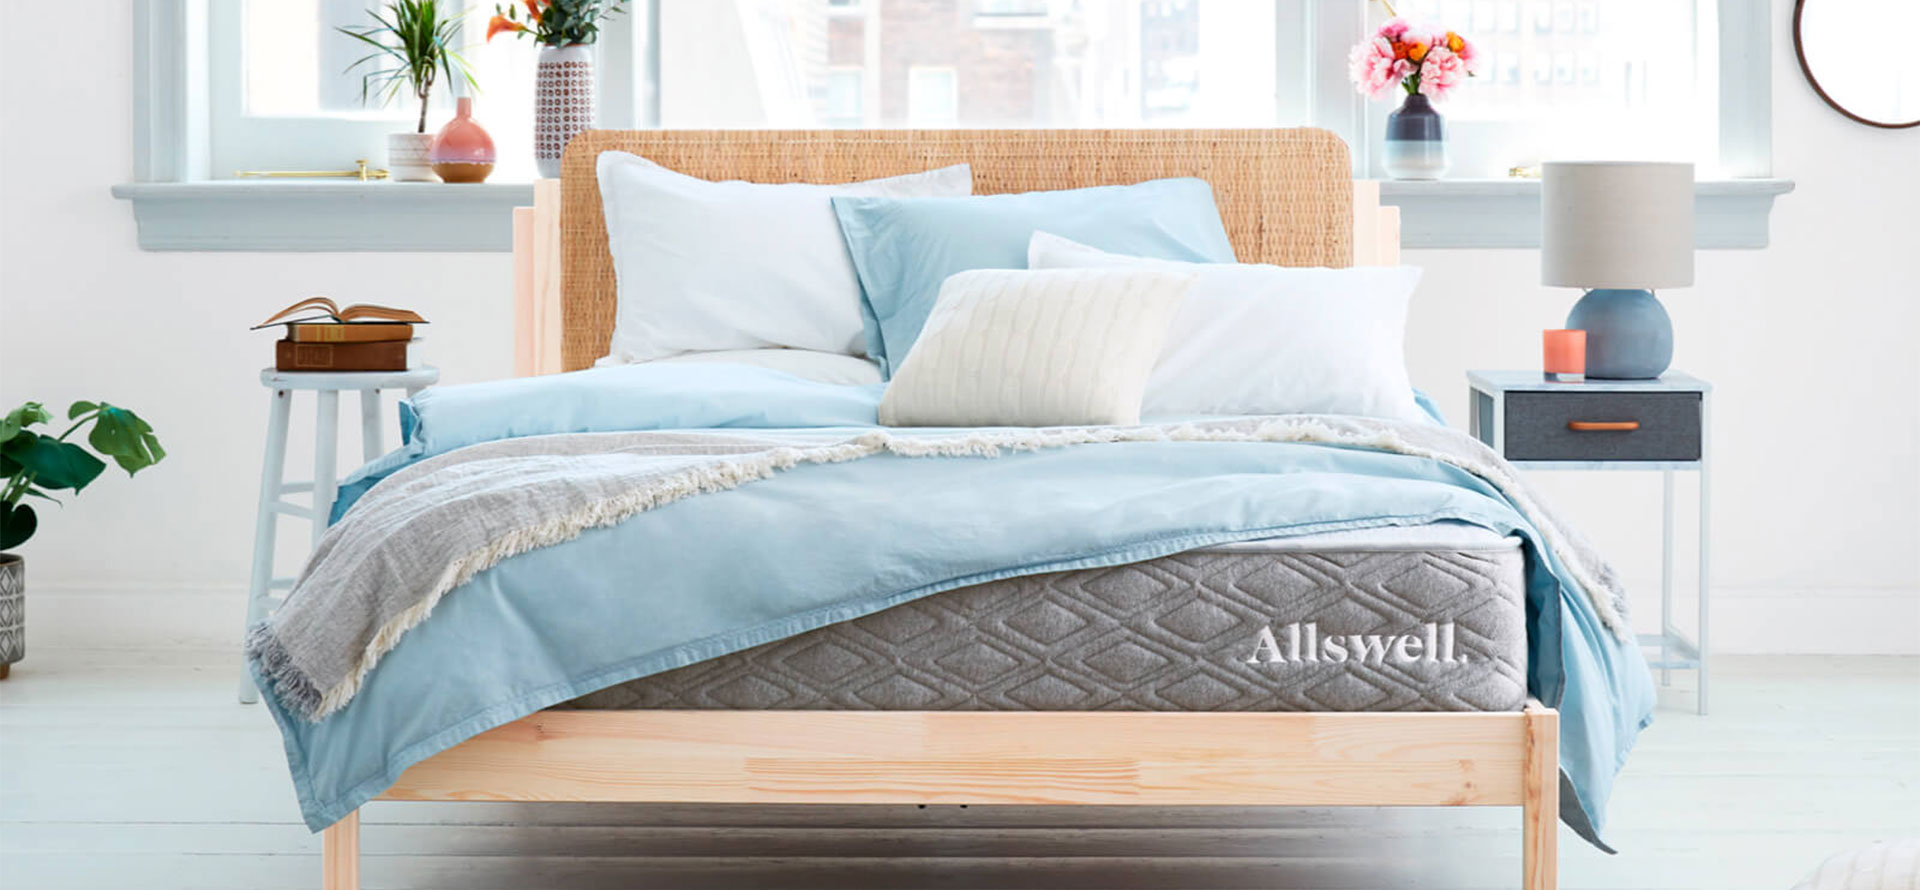 Allswell hybrid mattress in bed.